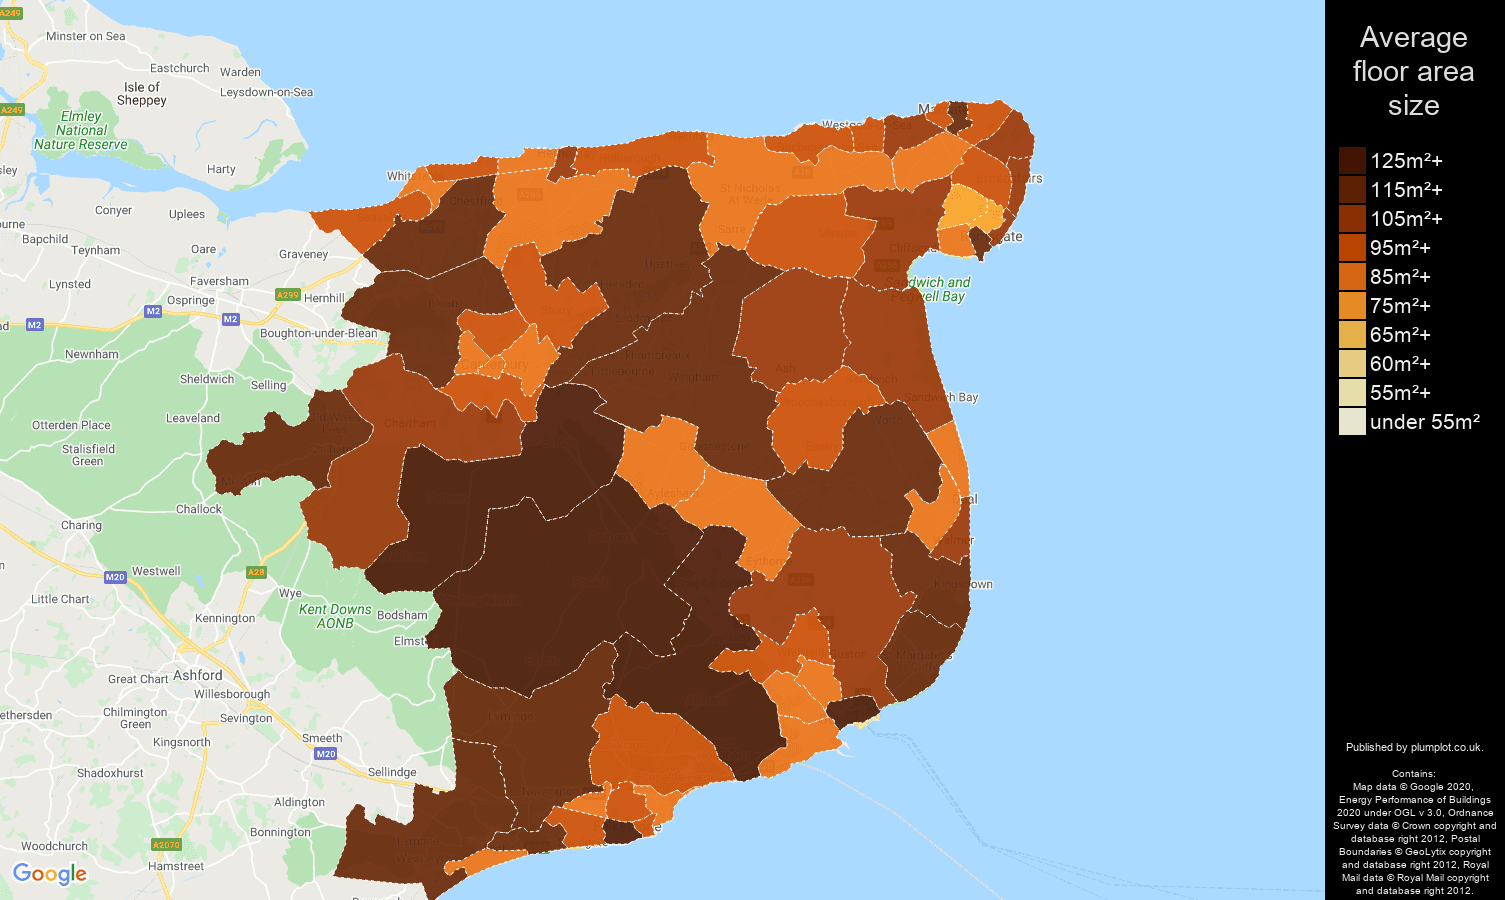 Canterbury map of average floor area size of houses